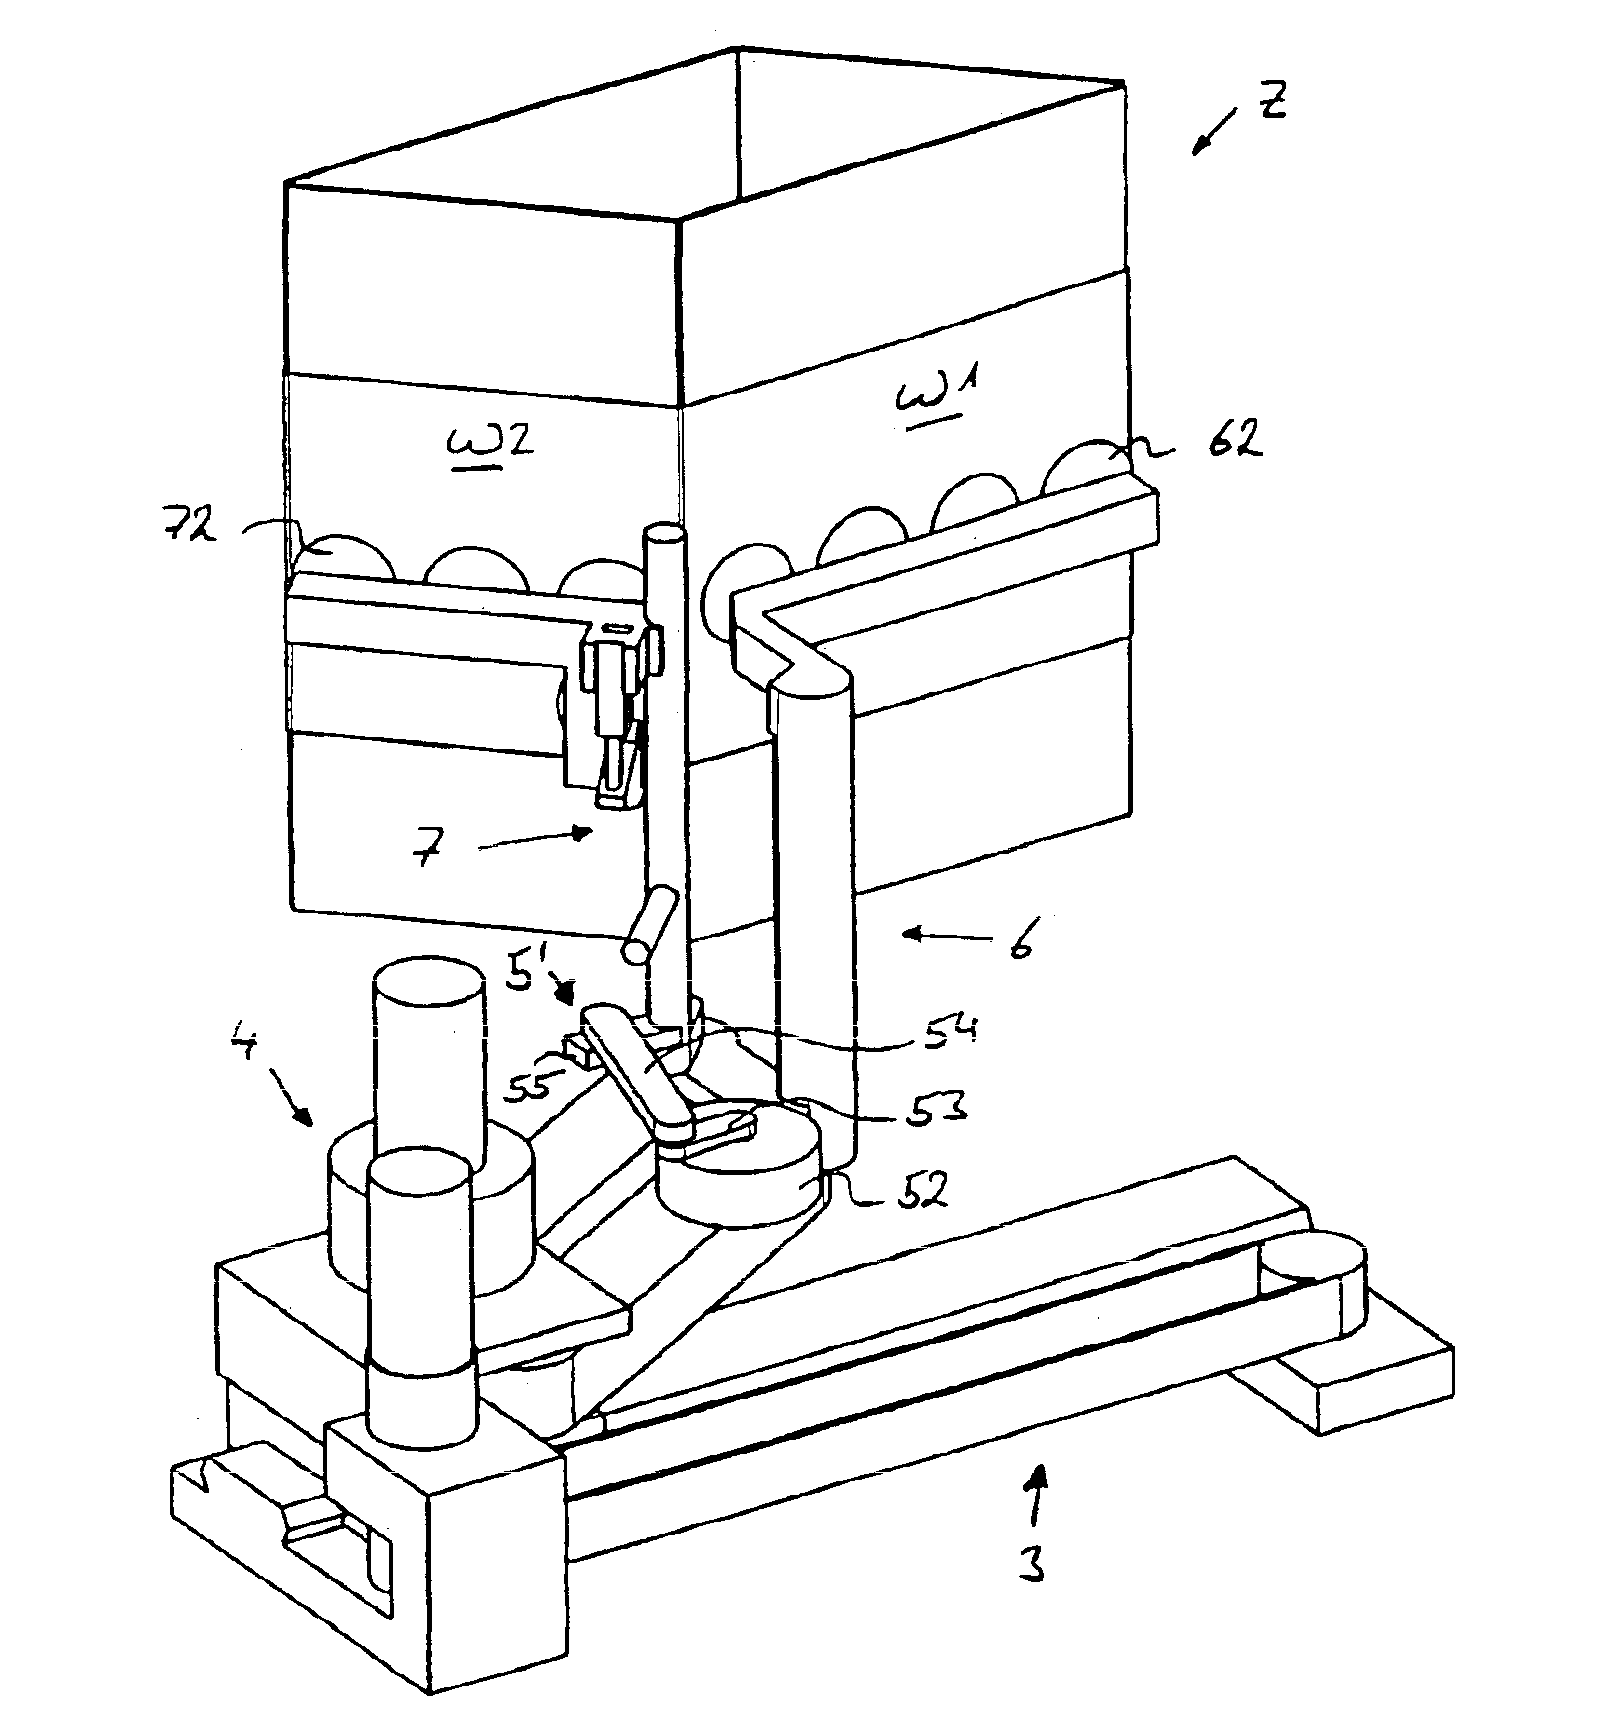 Apparatus for removing and erecting a folding-box blank